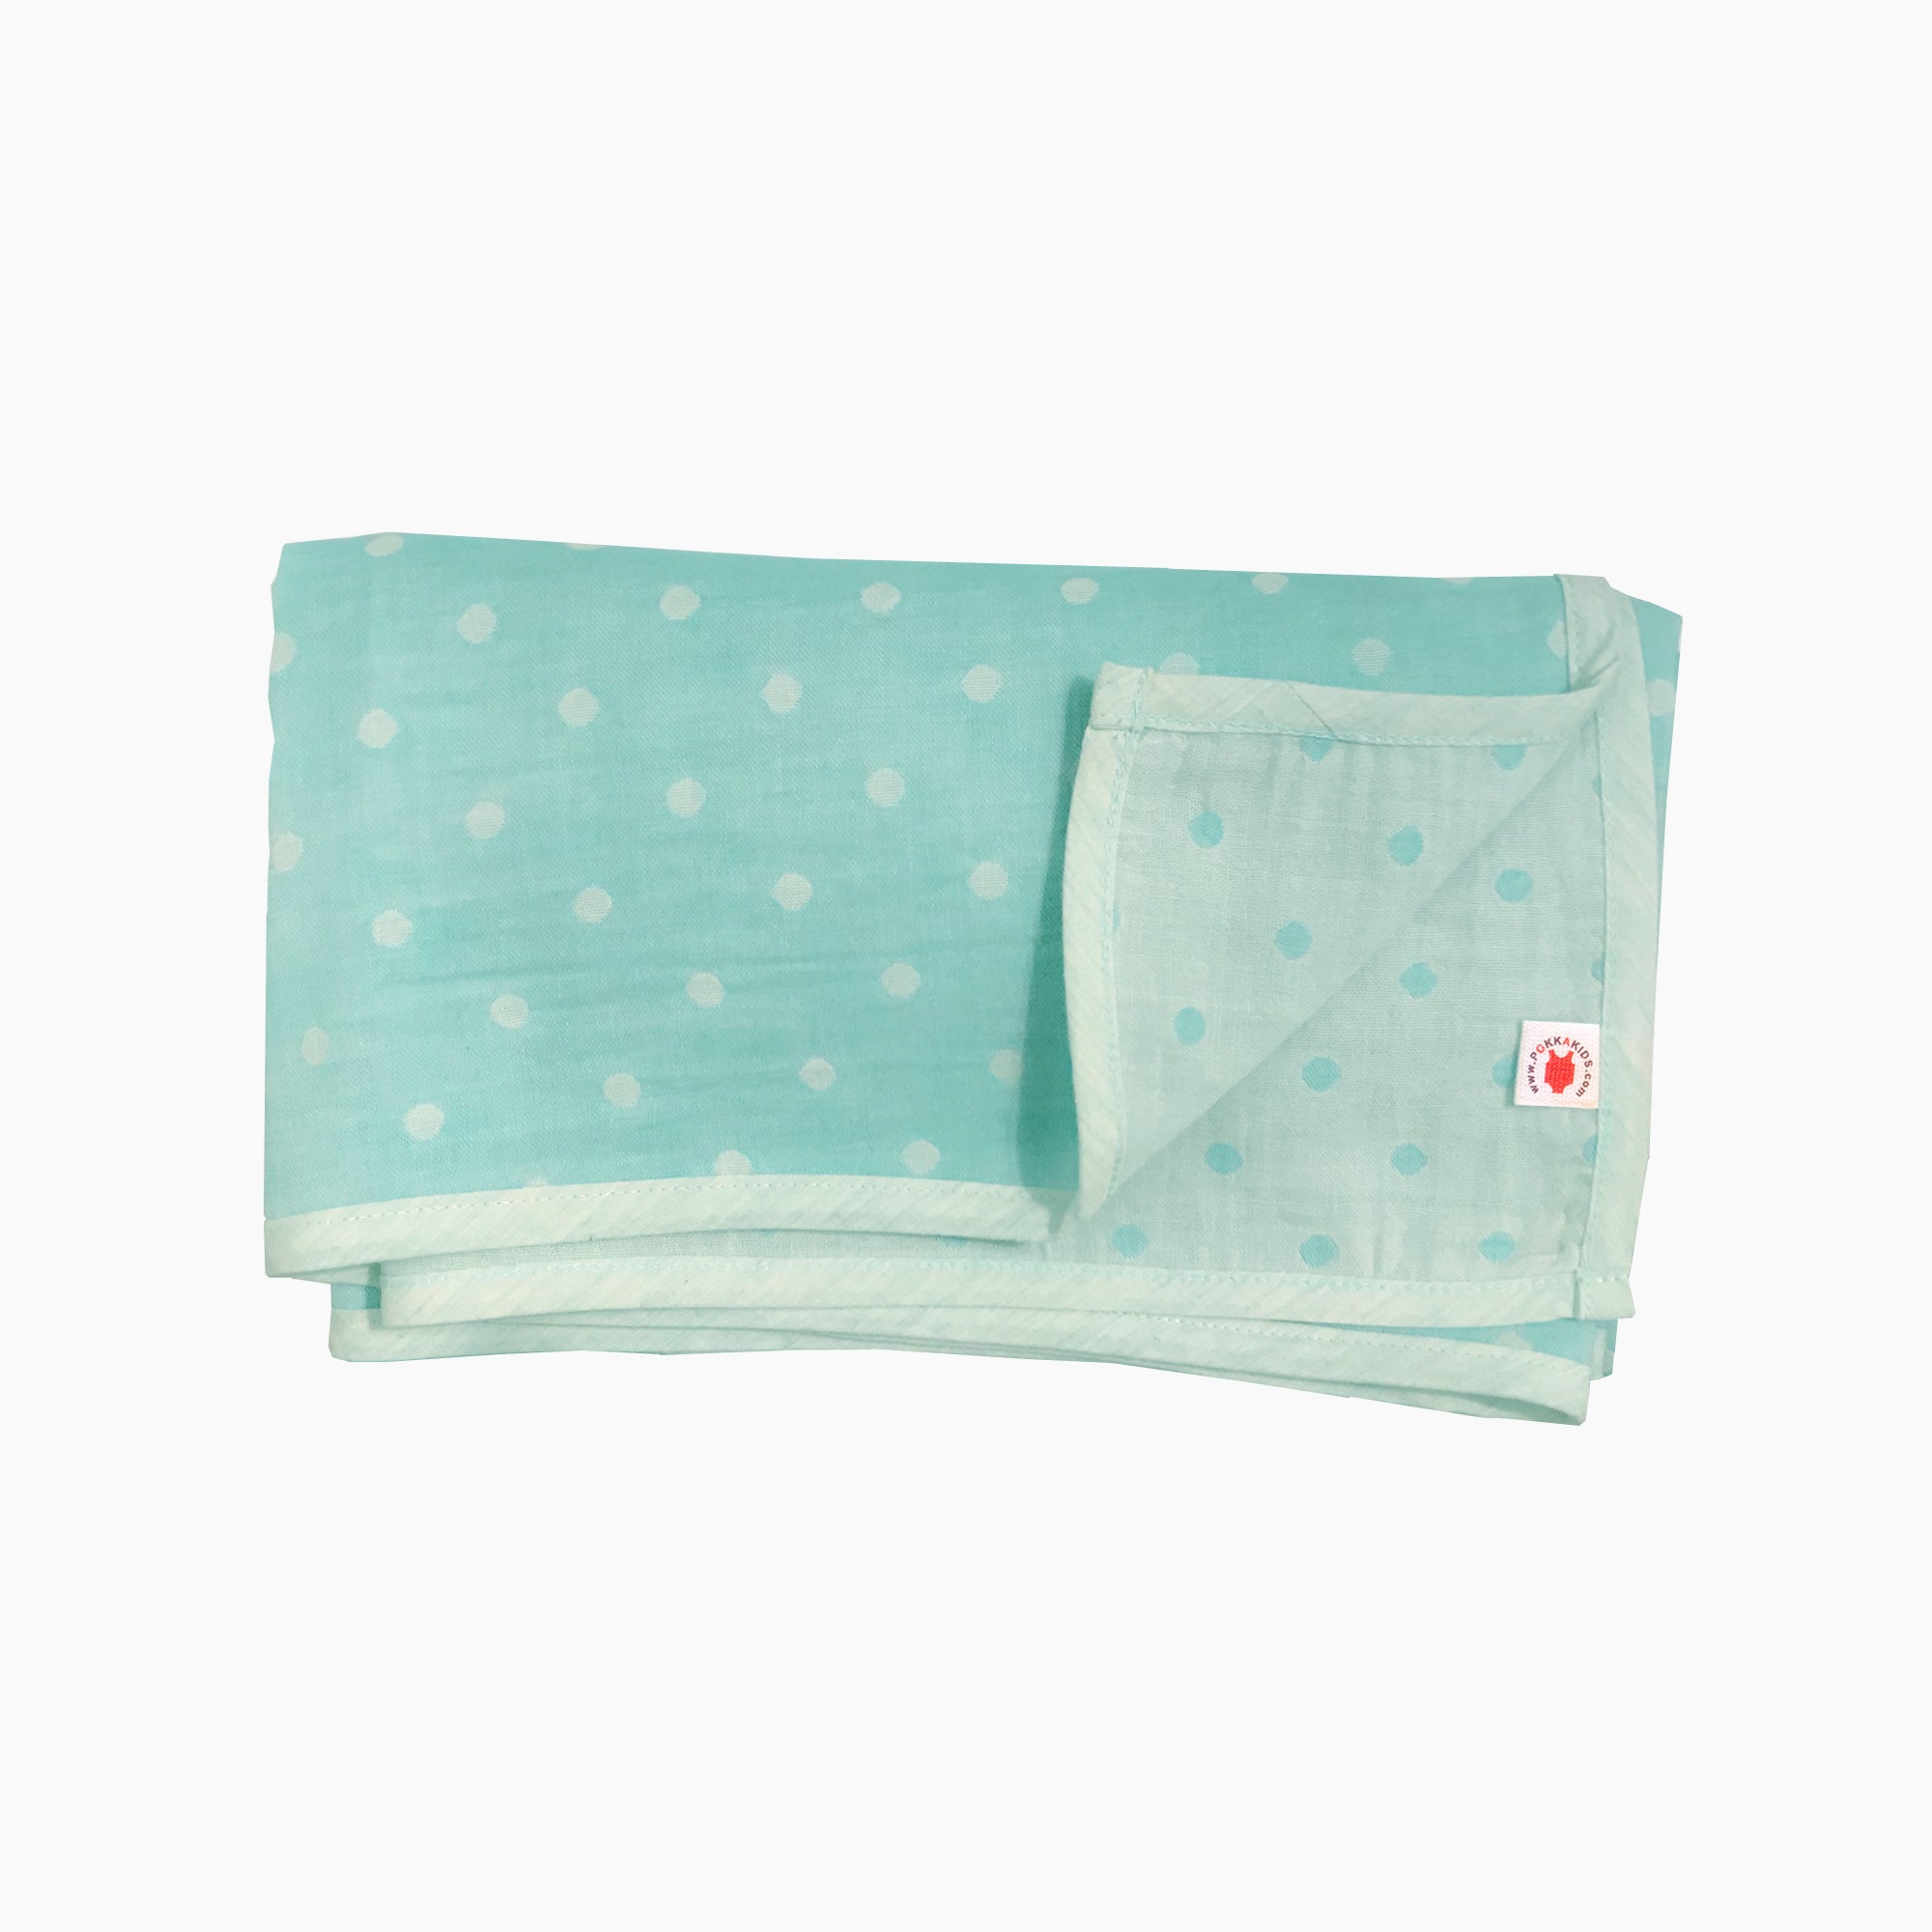 Folded mint polka dot GOTS certified organic cotton blanket for use as a stroller cover, or nursing cover